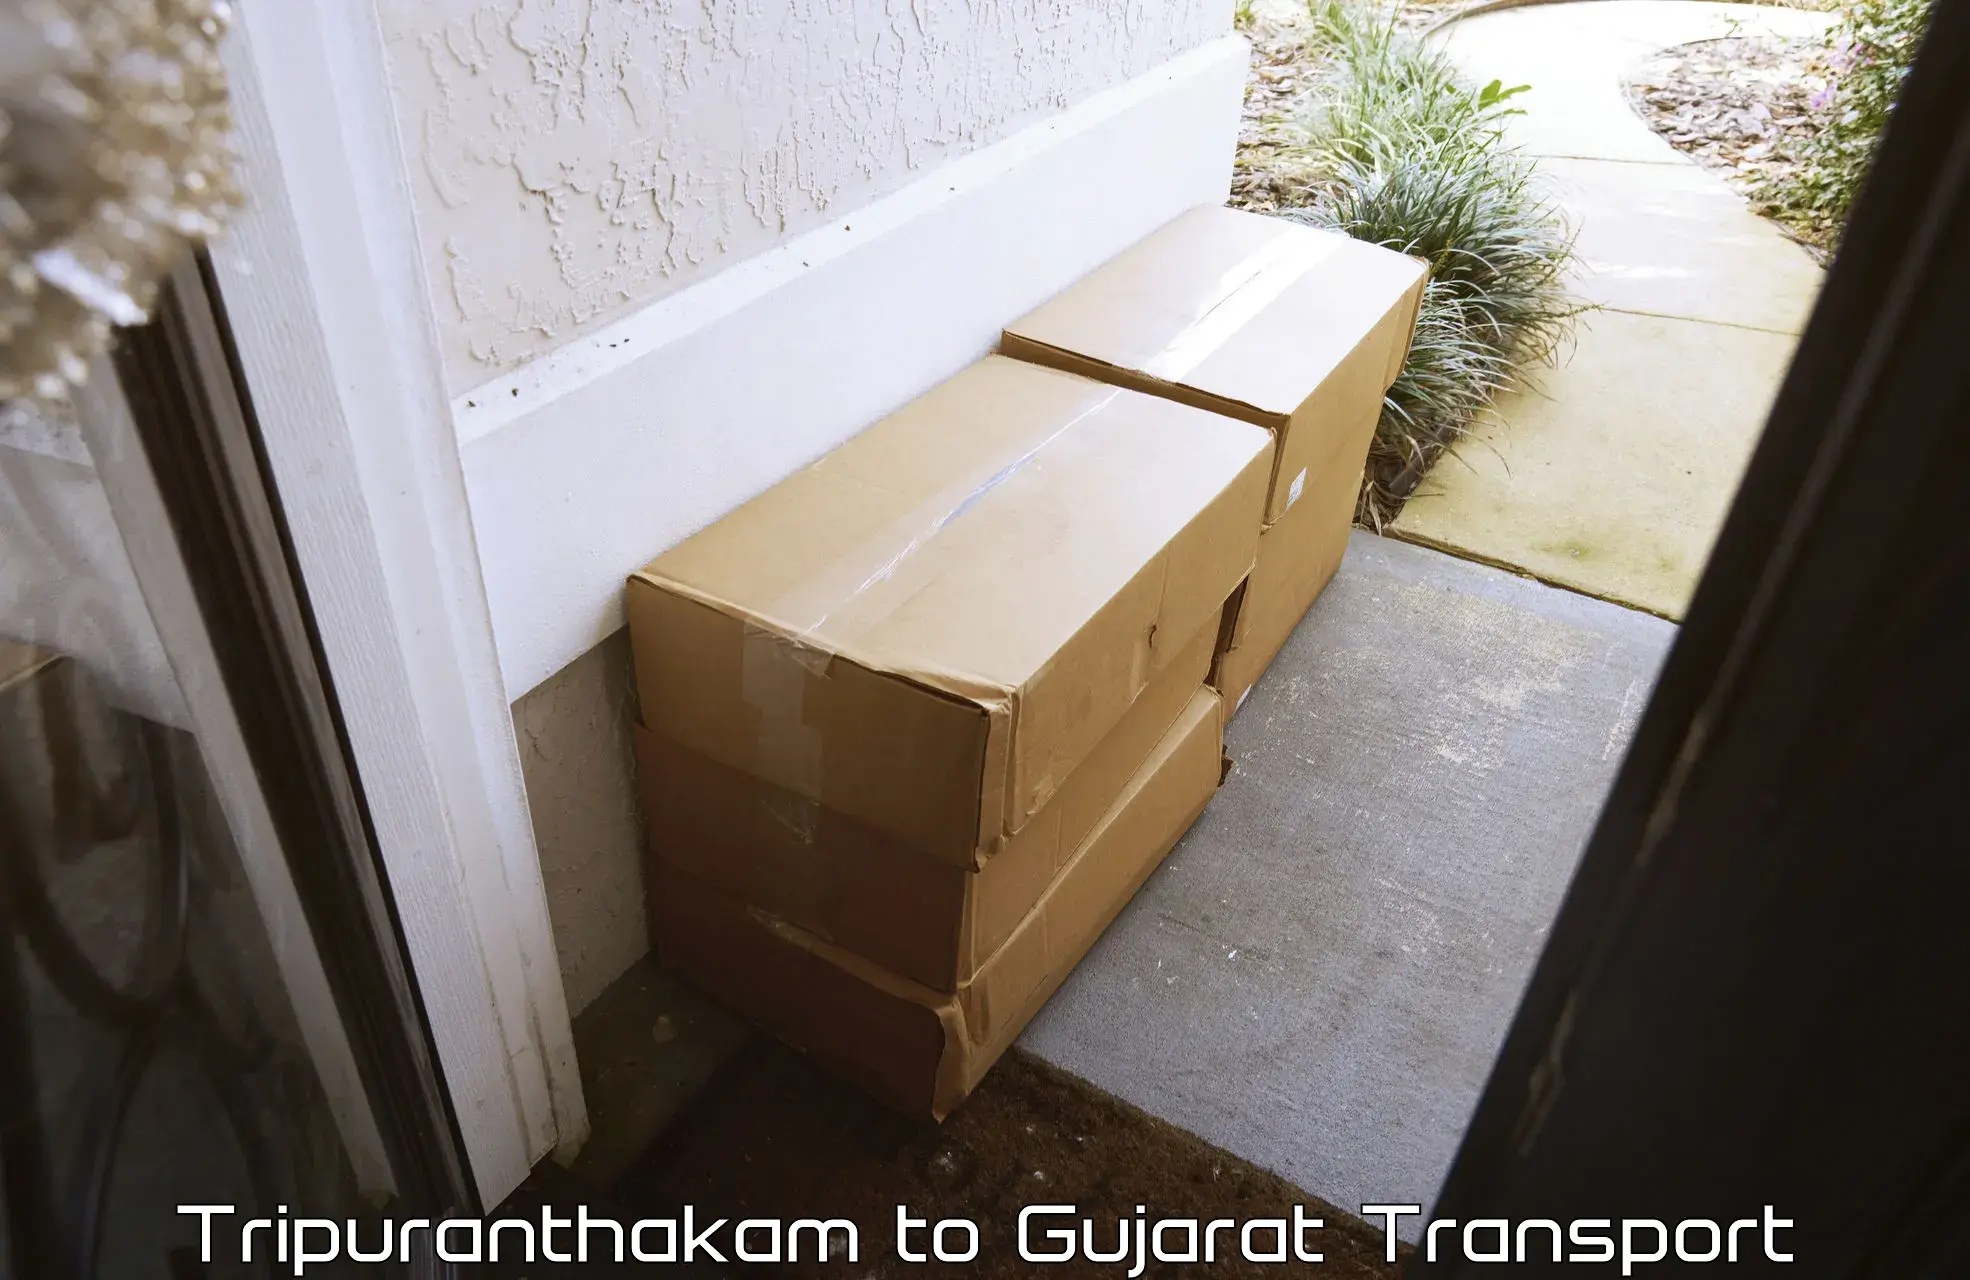 Air freight transport services Tripuranthakam to Botad